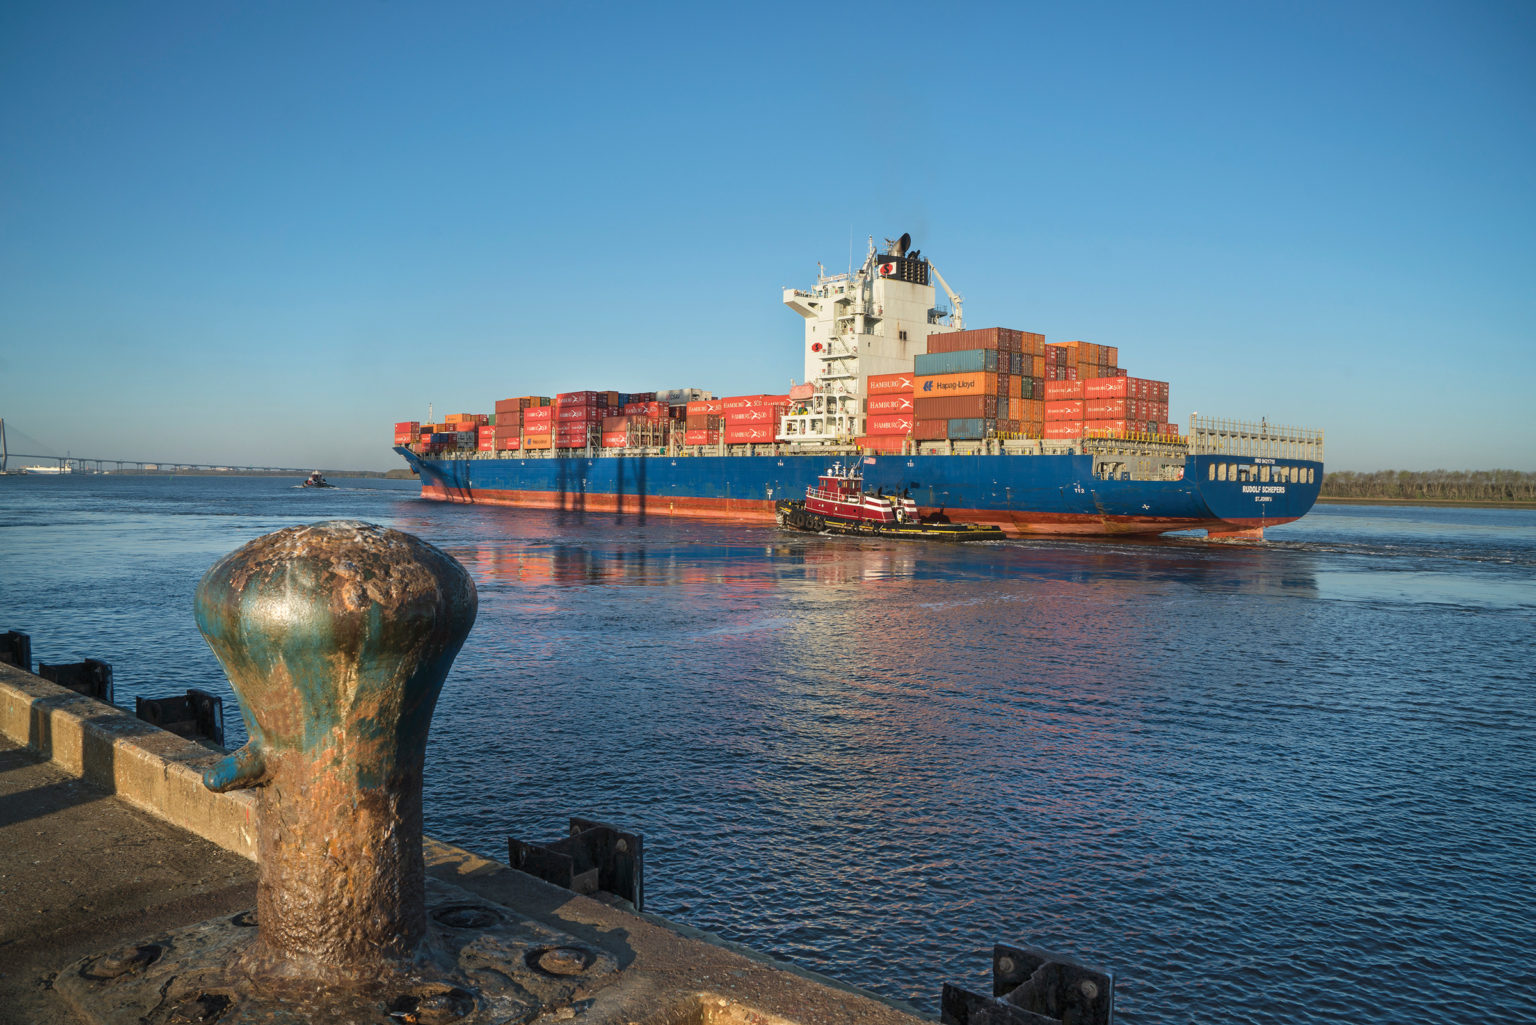 A large ship carries colorful container boxes on a clear sunny day